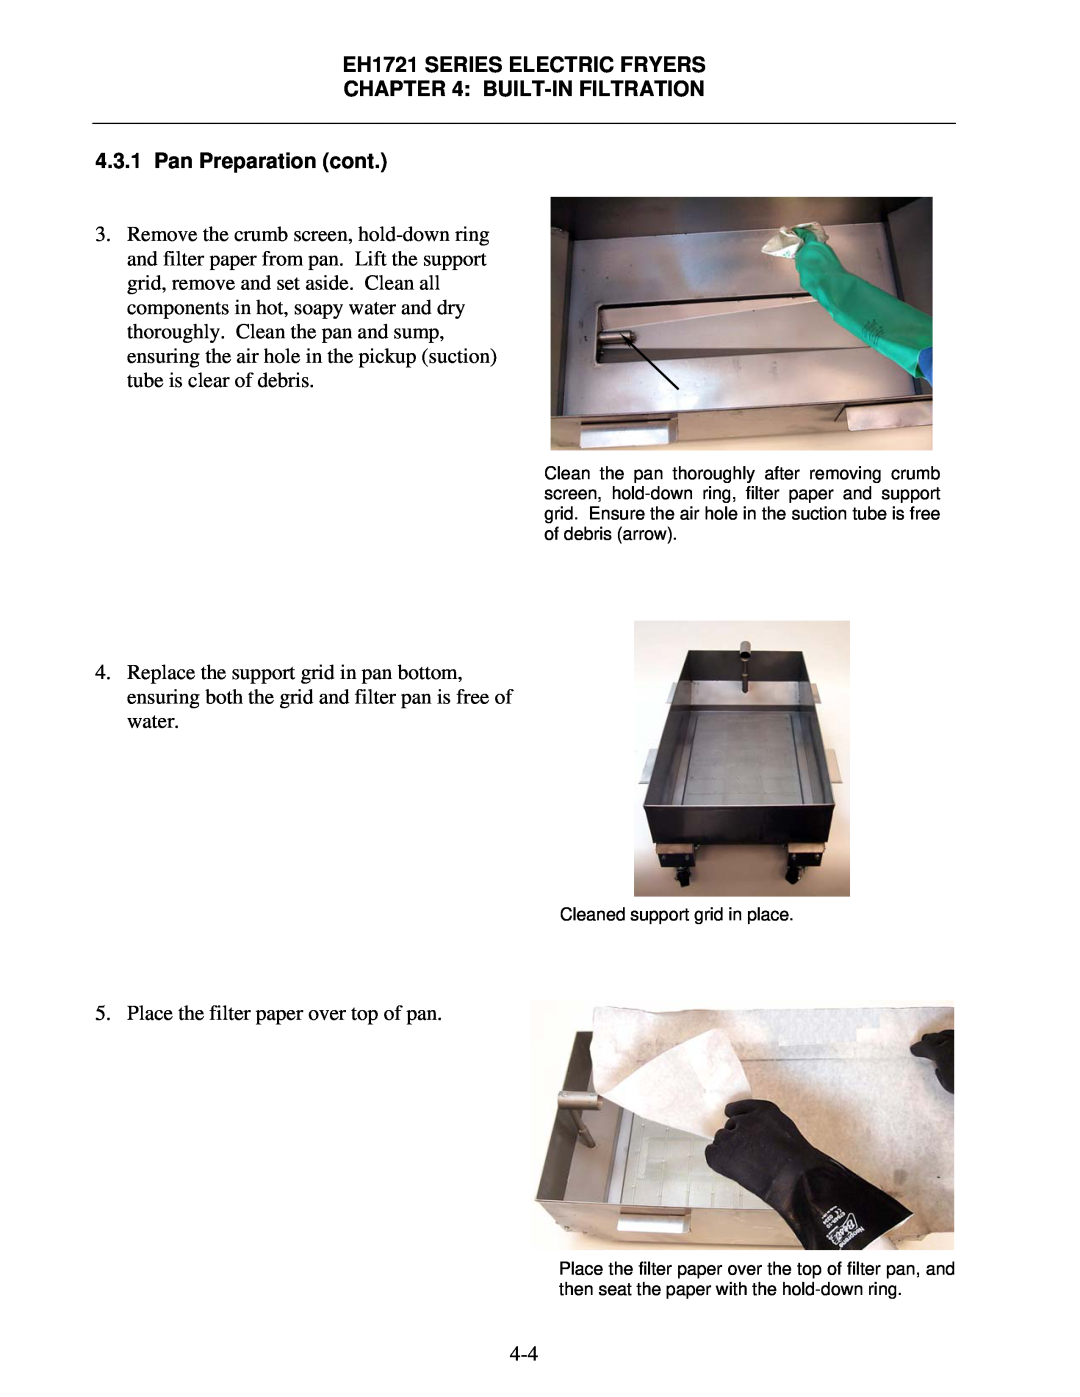 Frymaster FPH1721, BIH1721 operation manual Place the filter paper over top of pan 